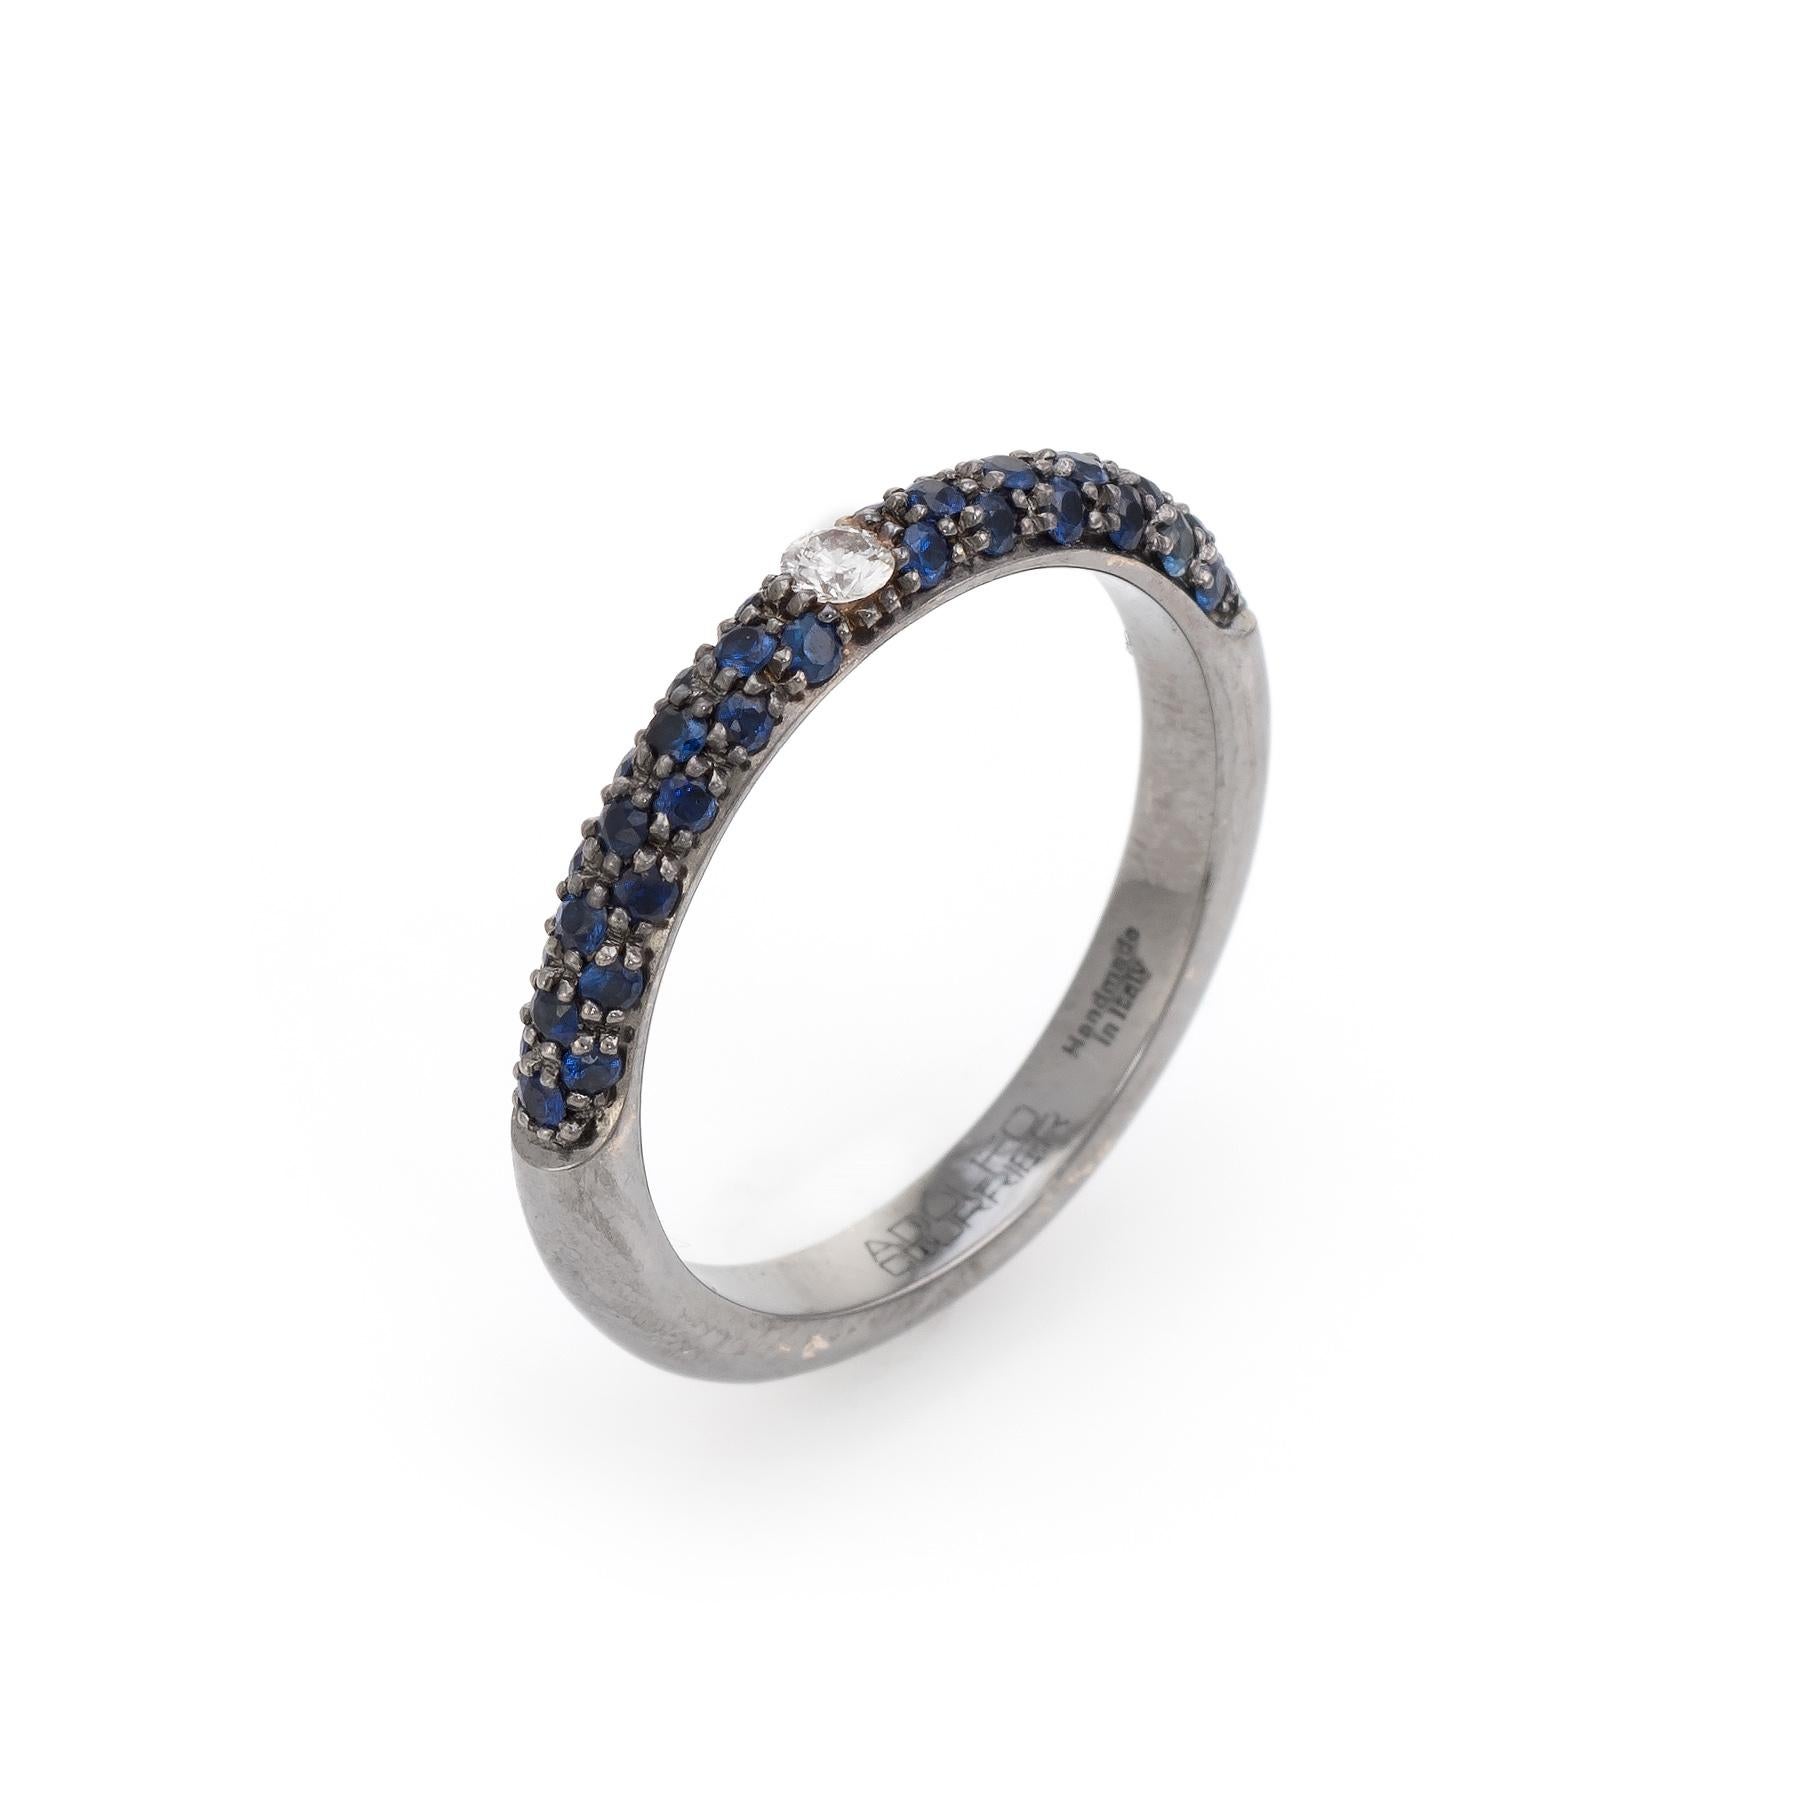 Elegant Adolfo Courrier stacking ring, crafted in 18 karat blackened white gold. 

One estimated 0.11 carat round brilliant cut diamond is set into the band (estimated at H-I color and VS2 clarity), accented with an estimated 0.71 carats of blue